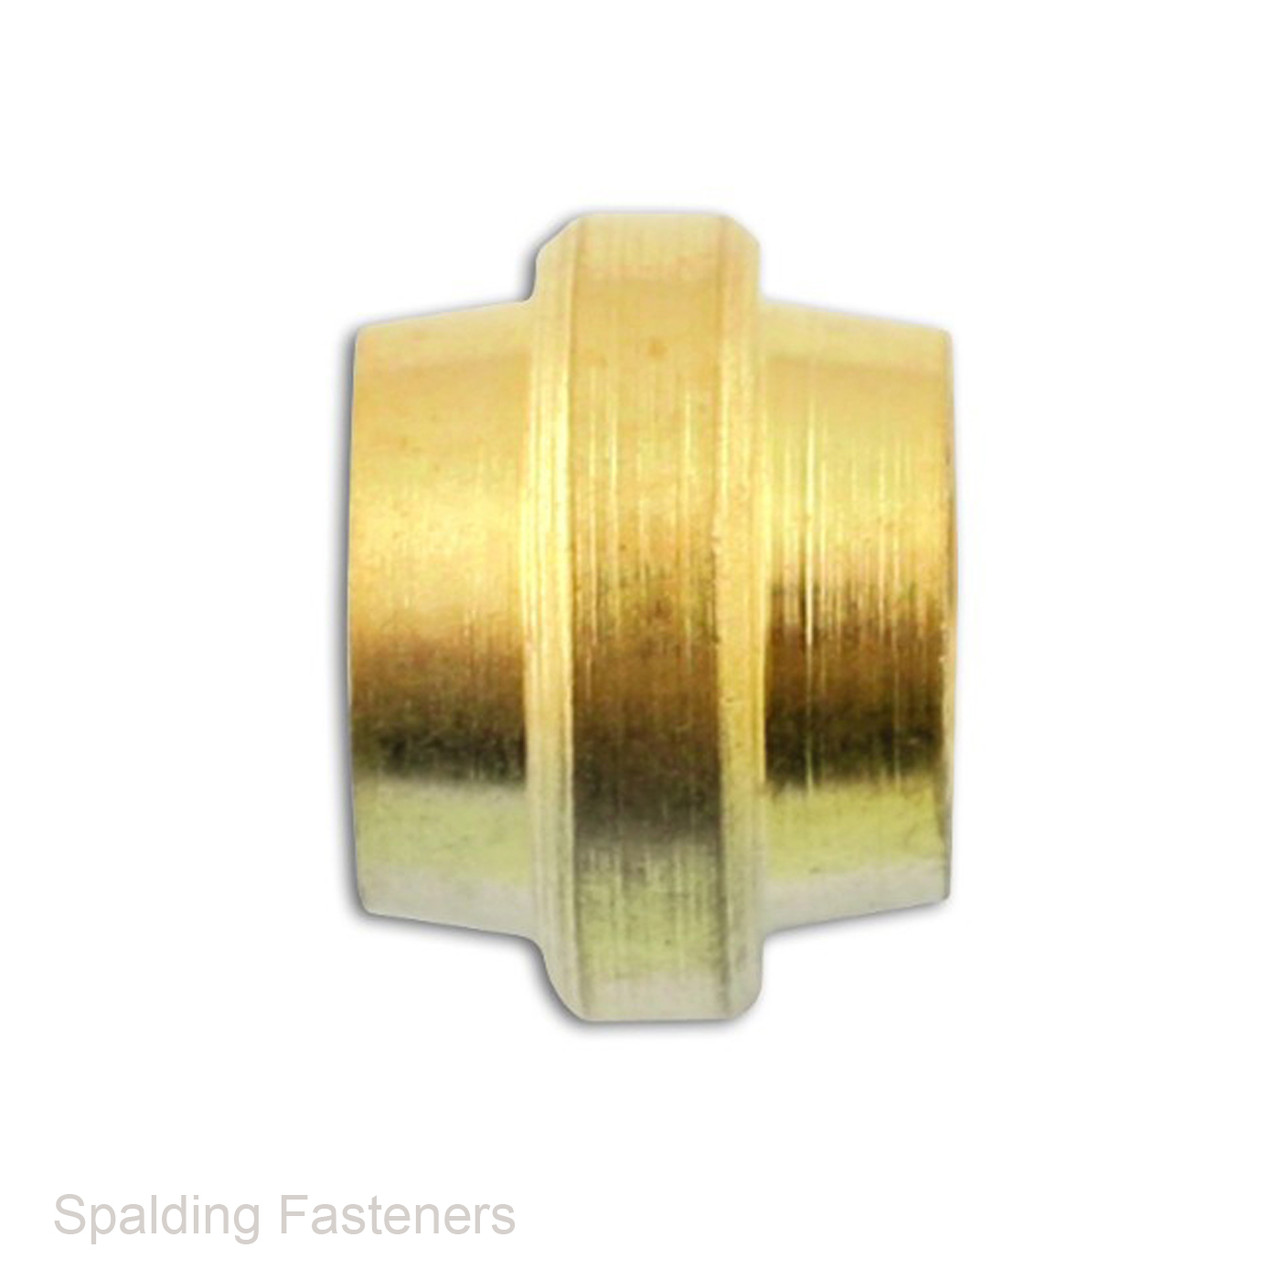 Imperial Brass Stepped Olives - Spalding Fasteners